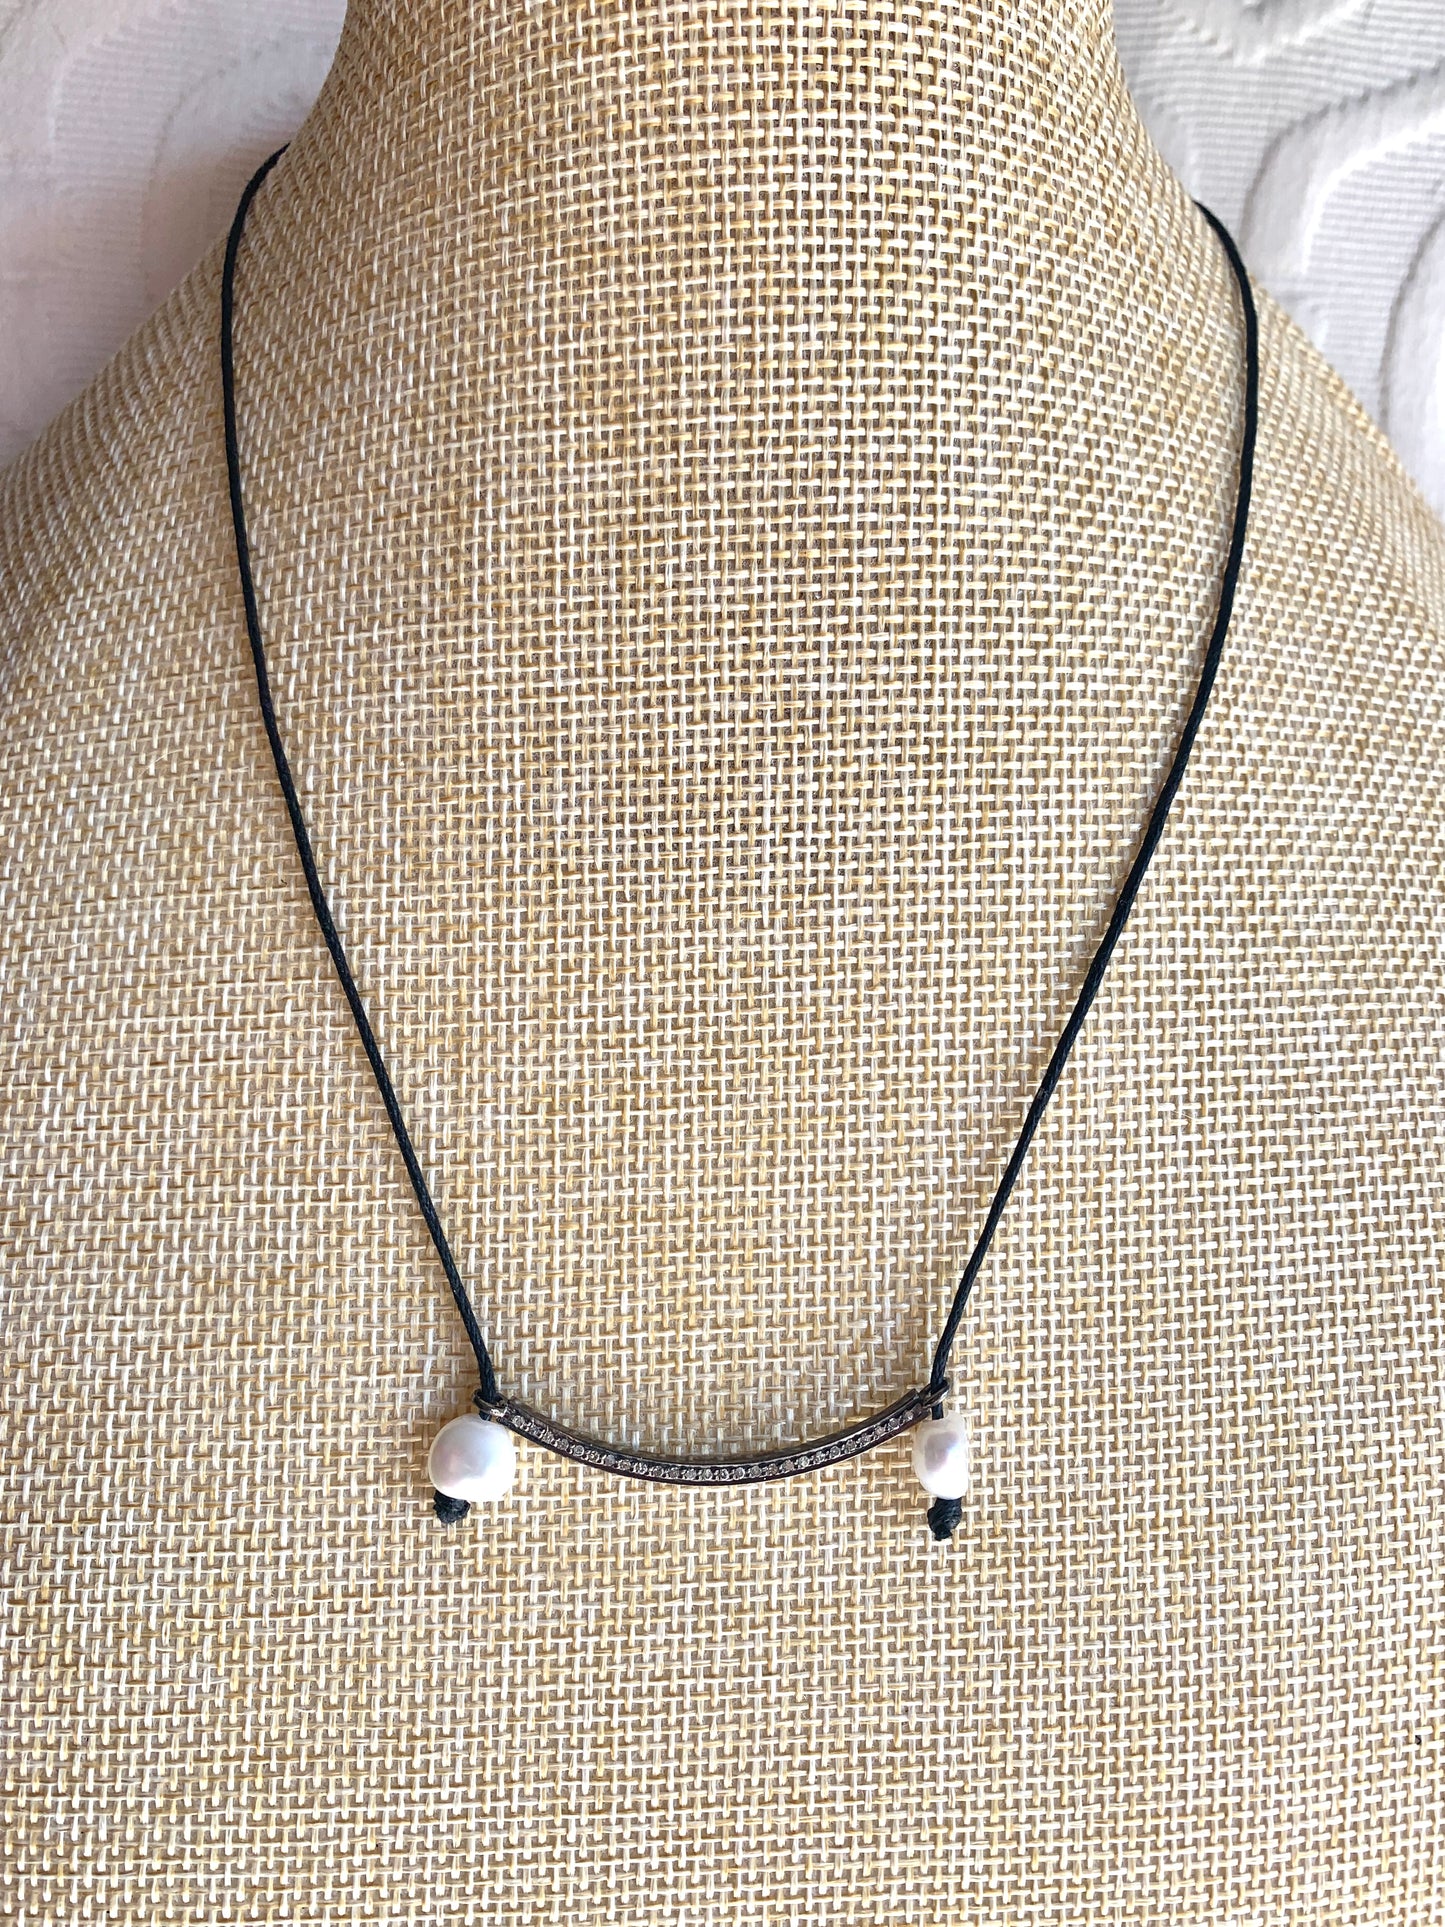 Black Cord Necklace with Pave Diamond Connector and Fresh Water Pearl Accents